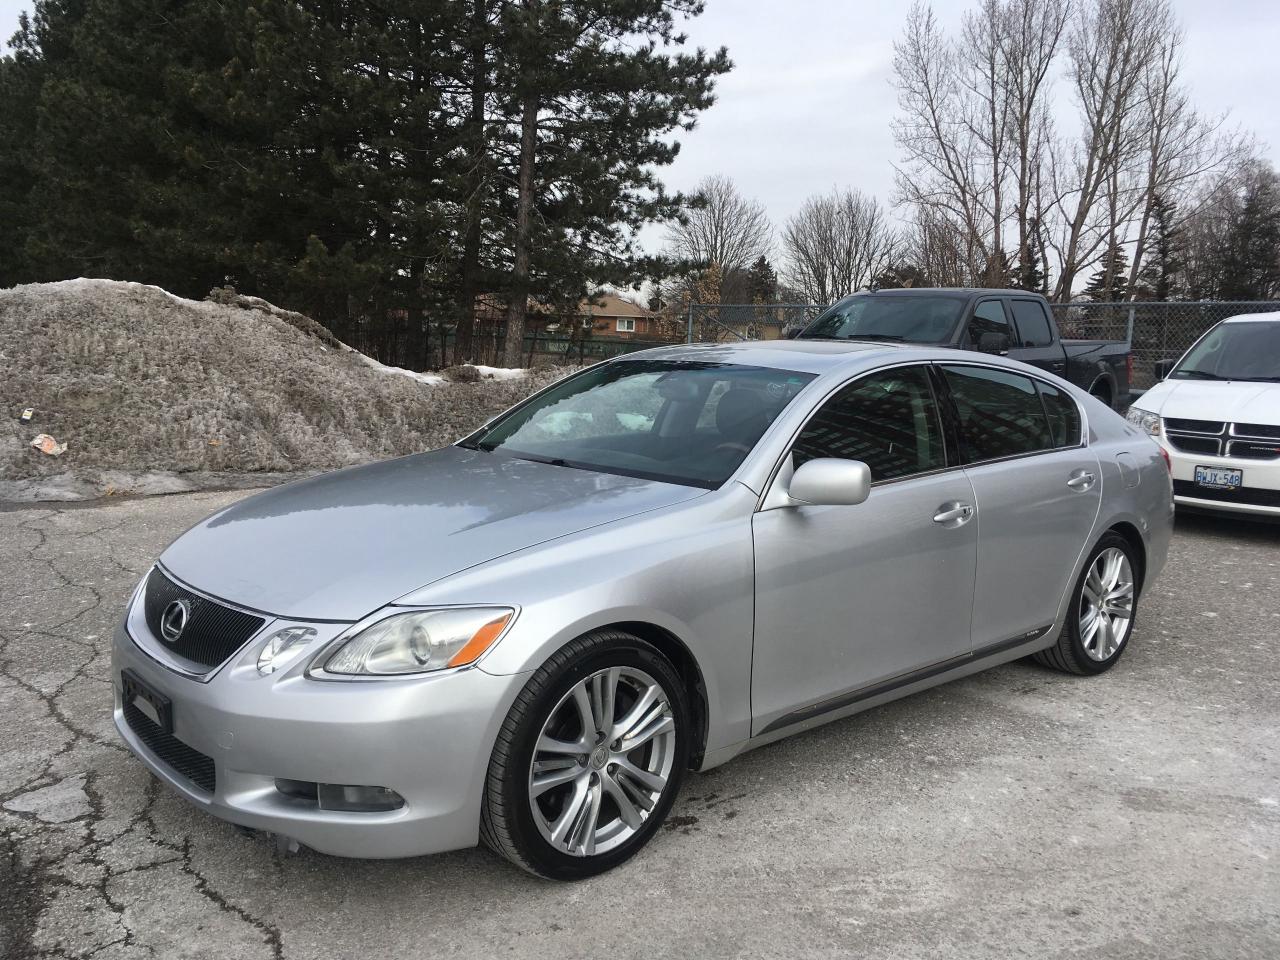 Used 2007 Lexus GS 450H HYBRID 450H for Sale in Toronto